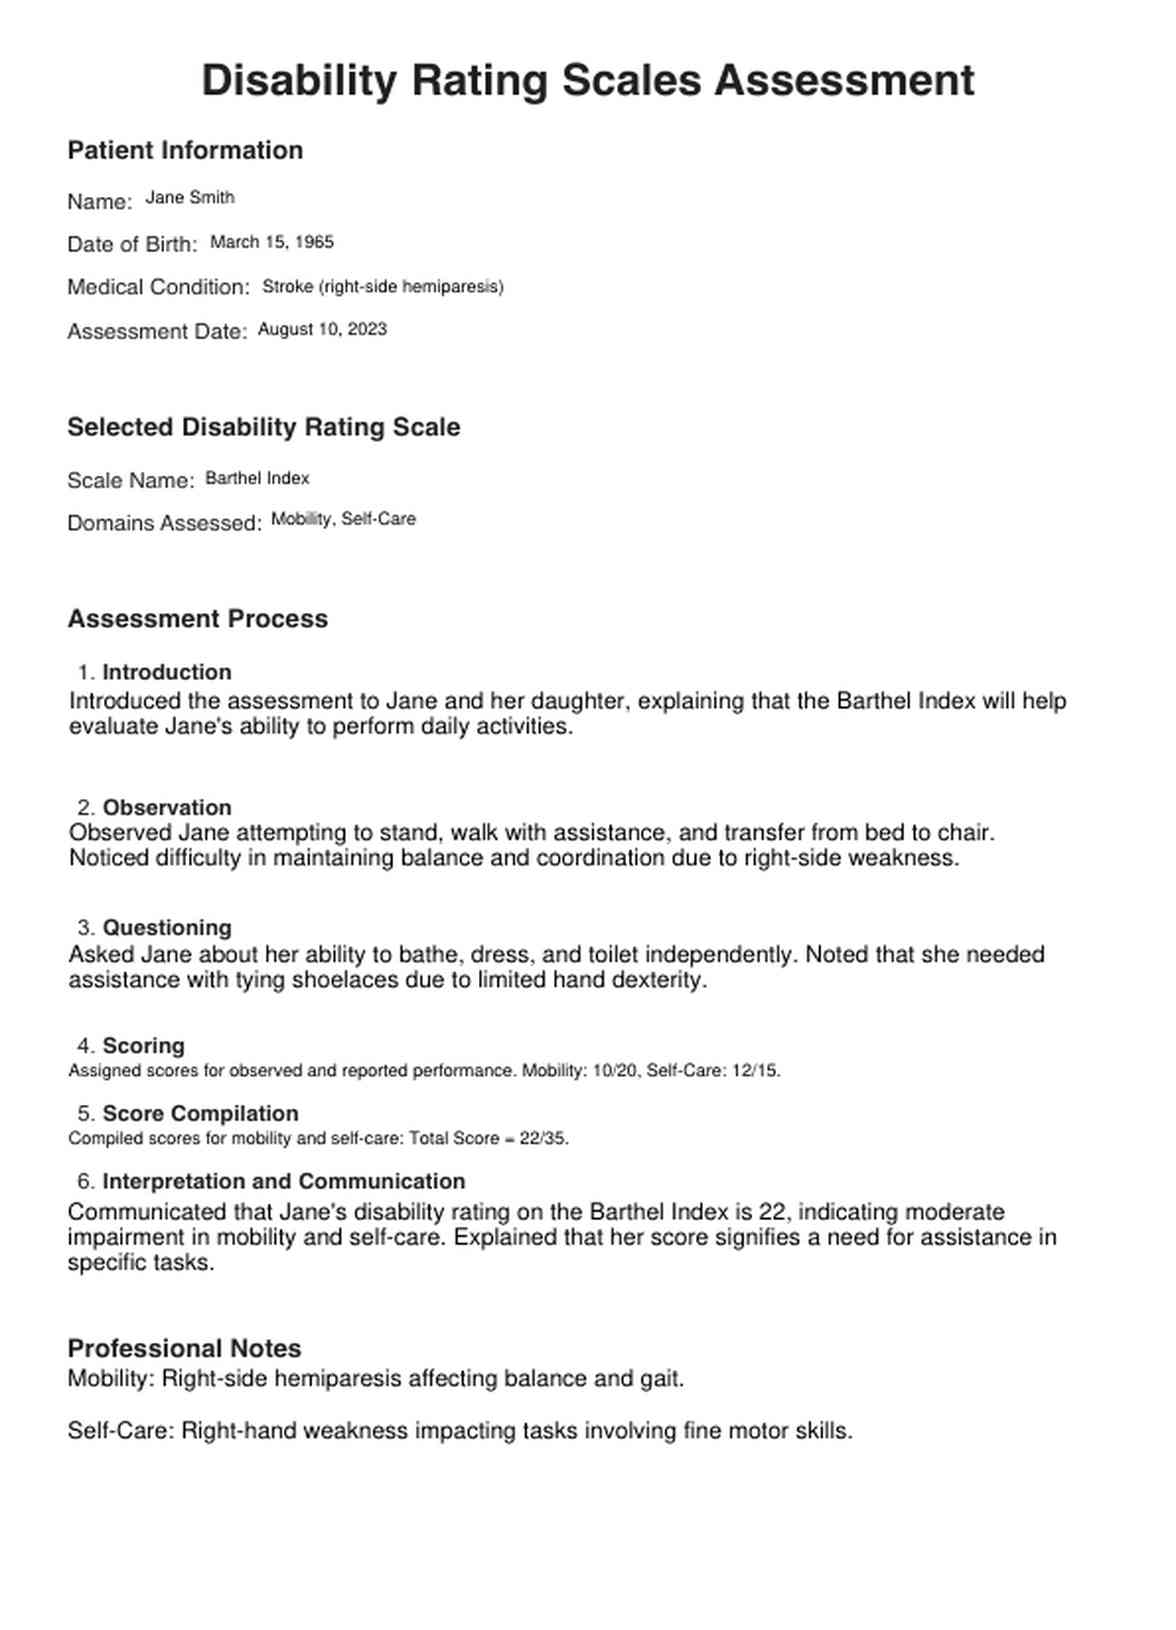 Disability Rating Scales PDF Example